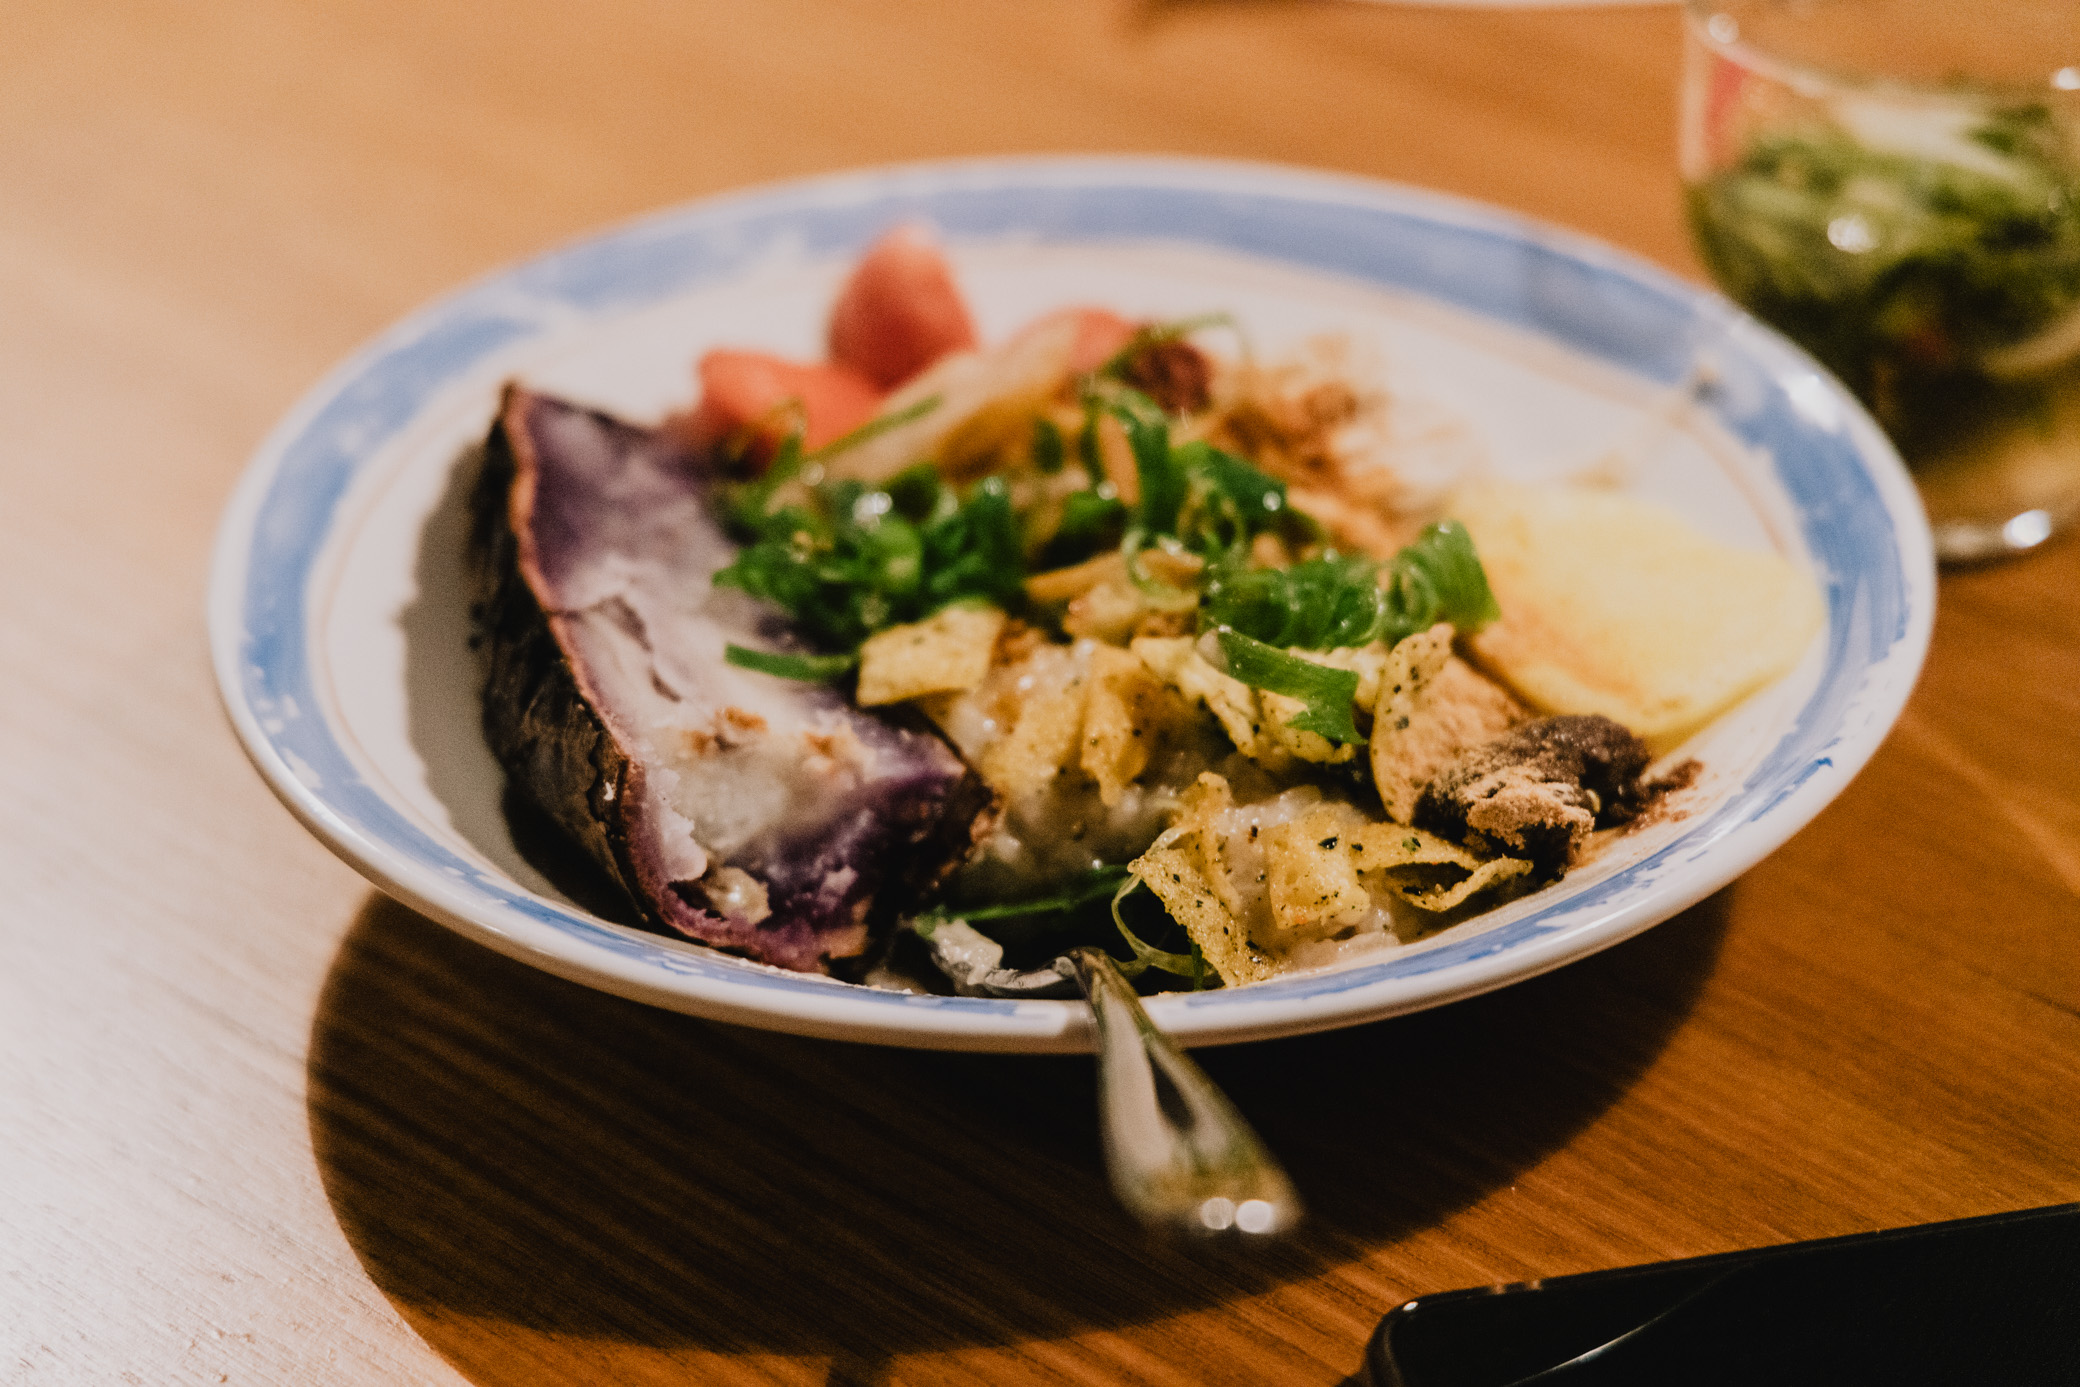 image of a bowl with savoury porridge featuring yam and fermented foods